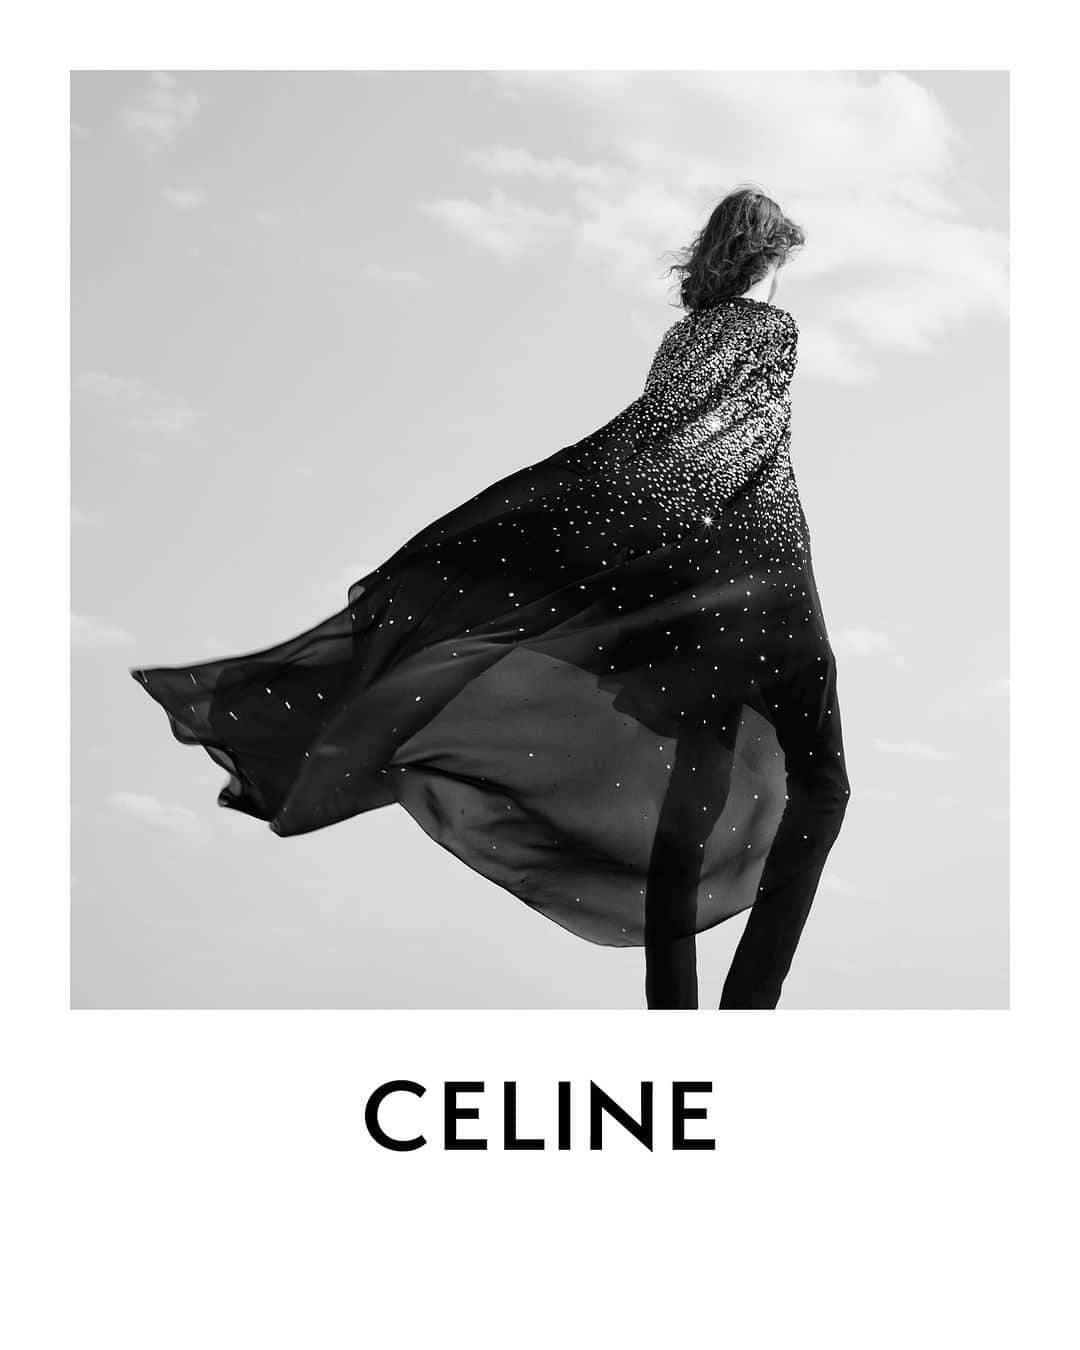 Celineのインスタグラム：「CELINE 20 HOMME SUMMER 24  DELUSIONAL DAYDREAM  LA GAÎTÉ LYRIQUE, PARIS LE GRAND REX, PARIS MONTE-CARLO OPERA GARNIER, MONACO JULY 2023  HEDI SLIMANE WOULD LIKE TO THANK H.R.H. THE PRINCESS OF HANOVER   A SPECIAL THANKS TO ALL THE MUSICIANS AND DJS WHO WERE SET TO PERFORM: PEACHES, YVES TUMOR, MODEL/ACTRIZ, THE LAST DINNER PARTY, PONS, SEXY DAMION, FCUKERS, GIRL_IRL, SEVYN, THANK YOU, HOMADE, MGNA CRRRTA, DESE, IZZY CAMINA.   #CELINEHOMME #DELUSIONALDAYDREAM #CELINEBYHEDISLIMANE」